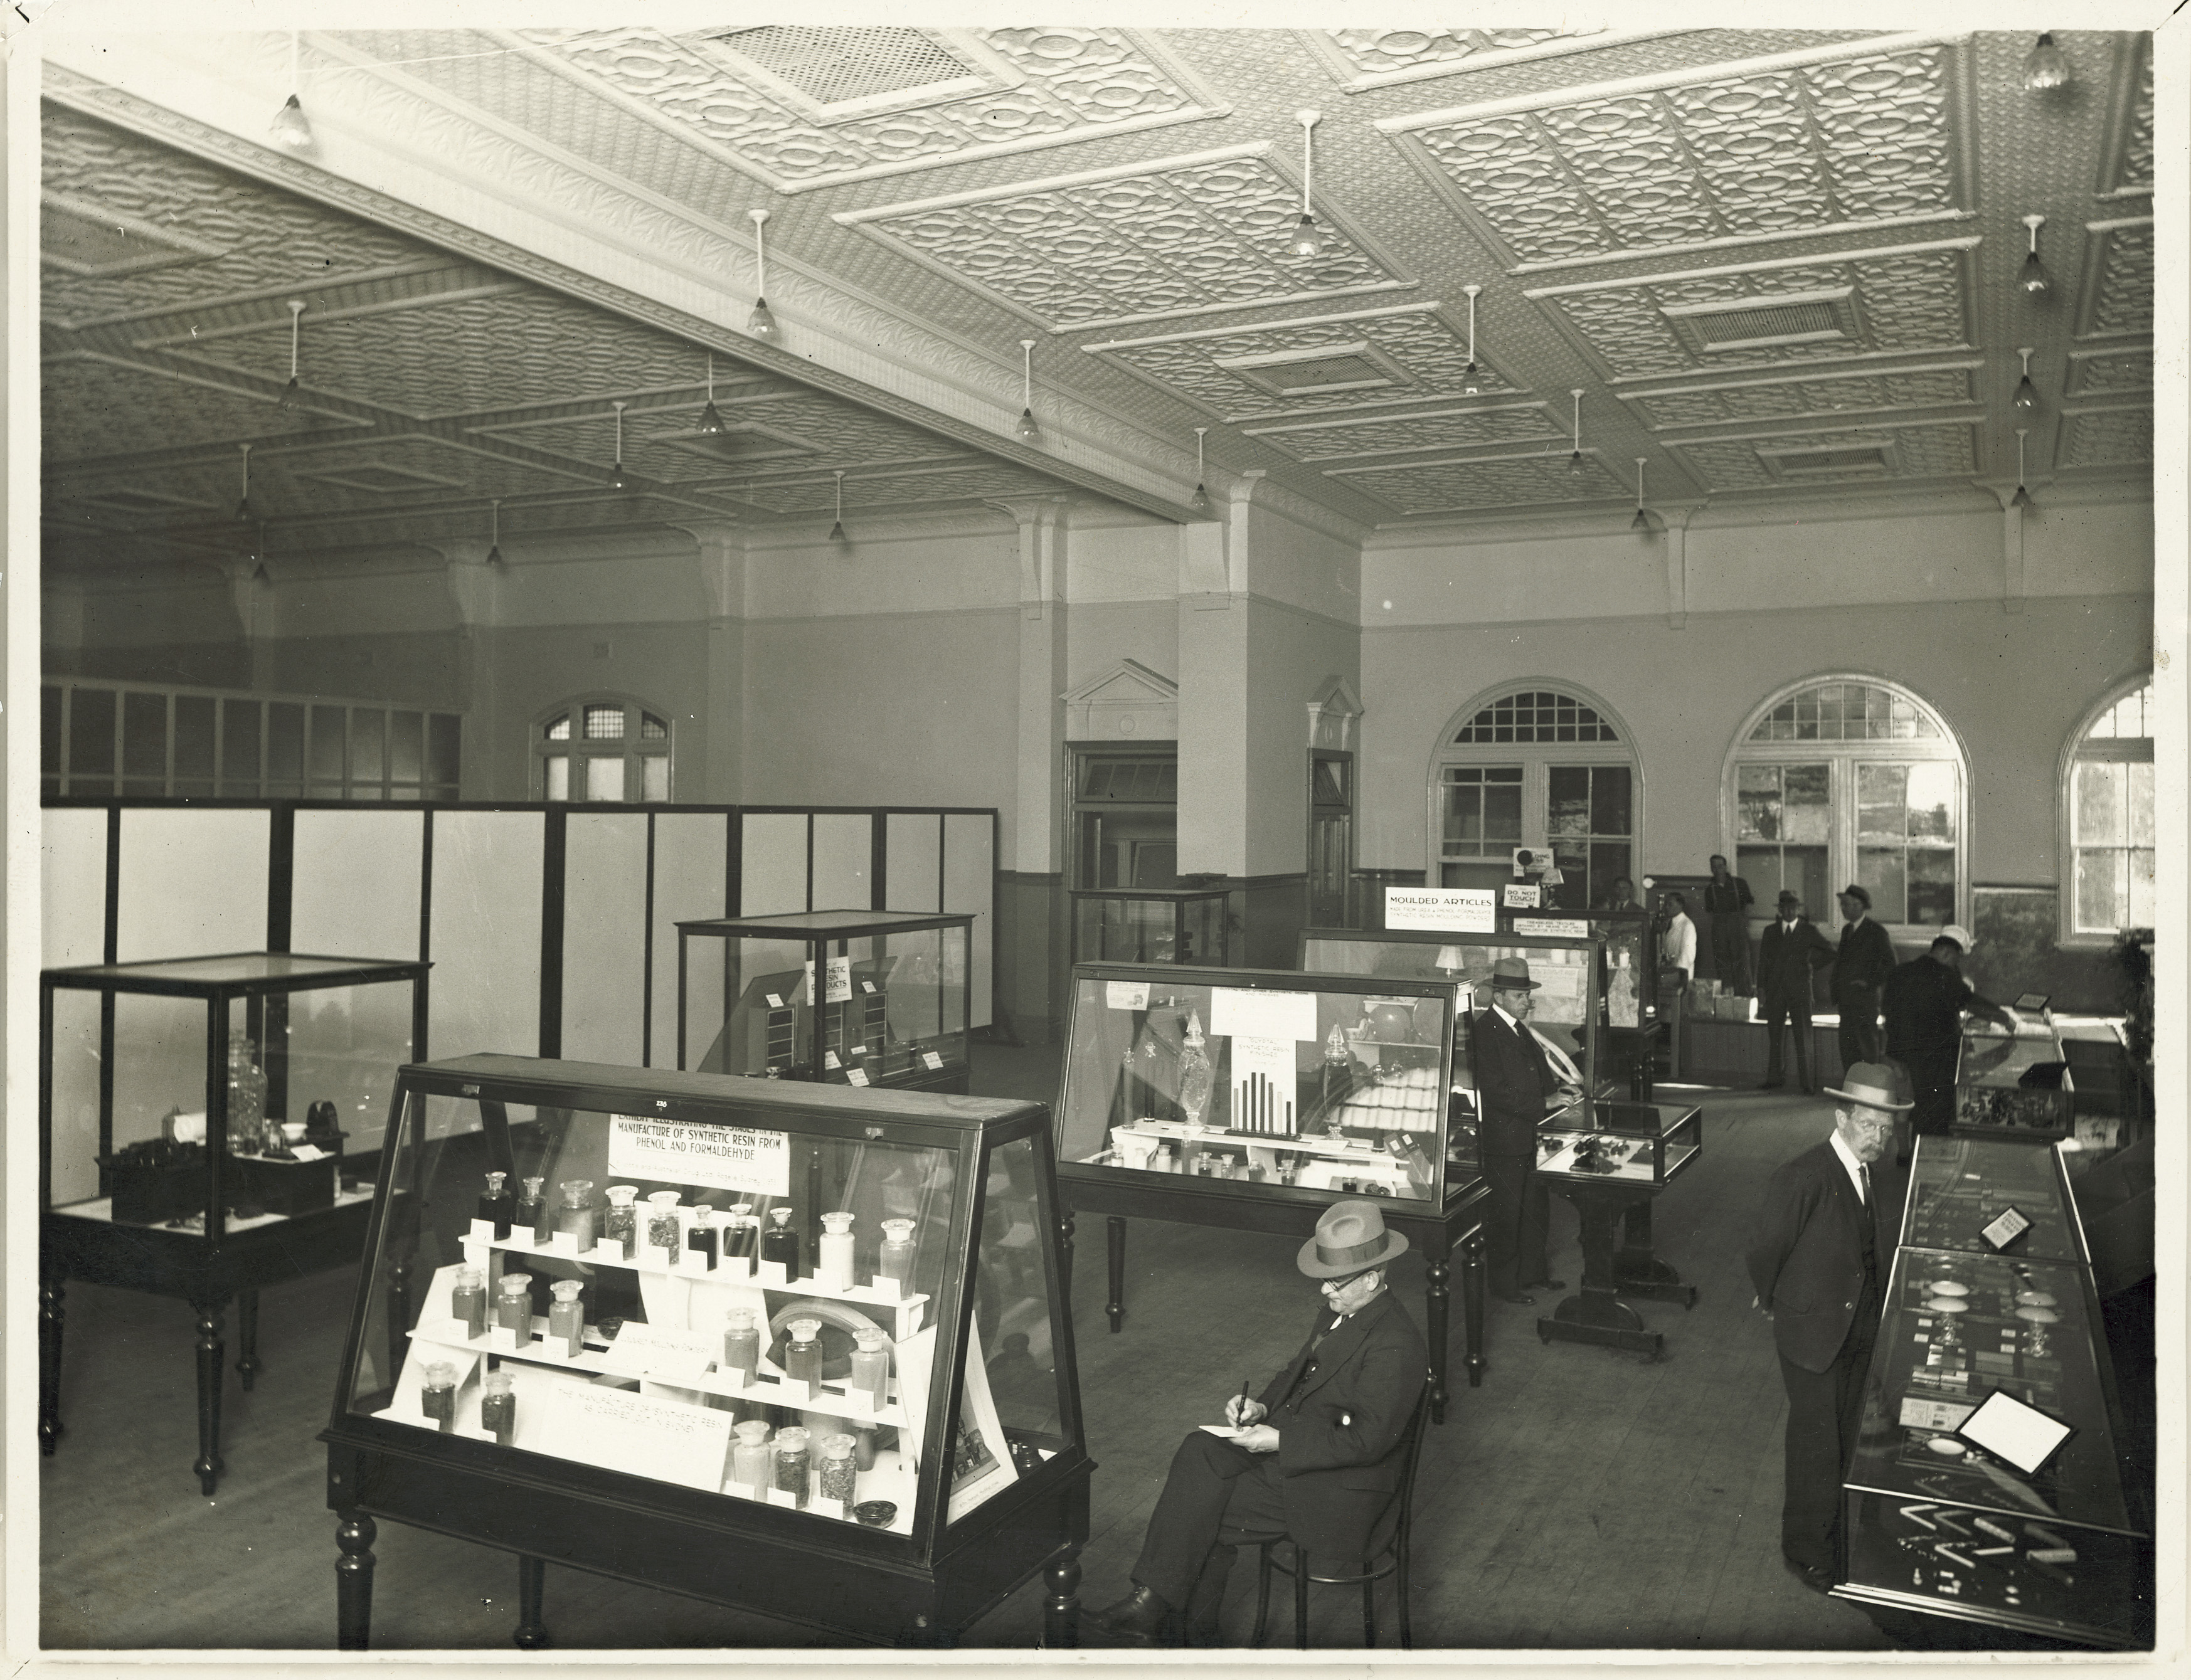 First exhibition of plastics in Australia, Turner Hall, Sydney Technical College 1934 [MAAS Collection]